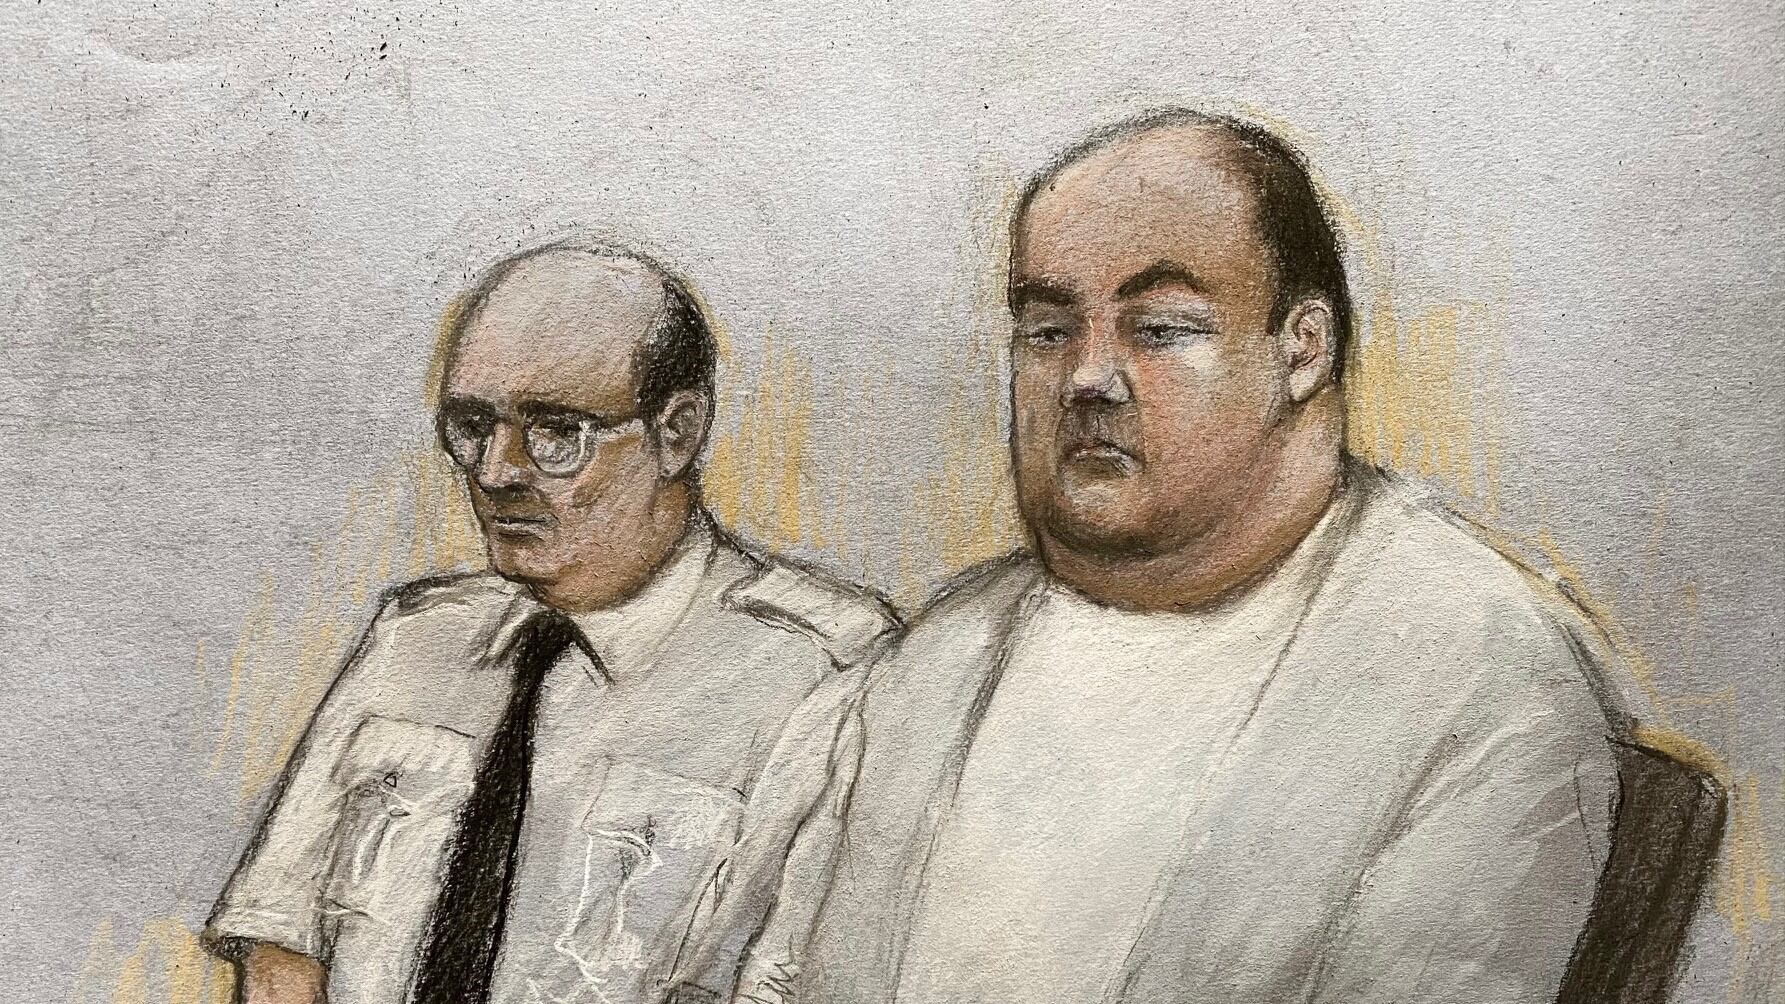 Court artist drawing by Elizabeth Cook of Gavin Plumb (right) who plotted to kidnap and murder Holly Willoughby, appearing at Chelmsford Crown Court